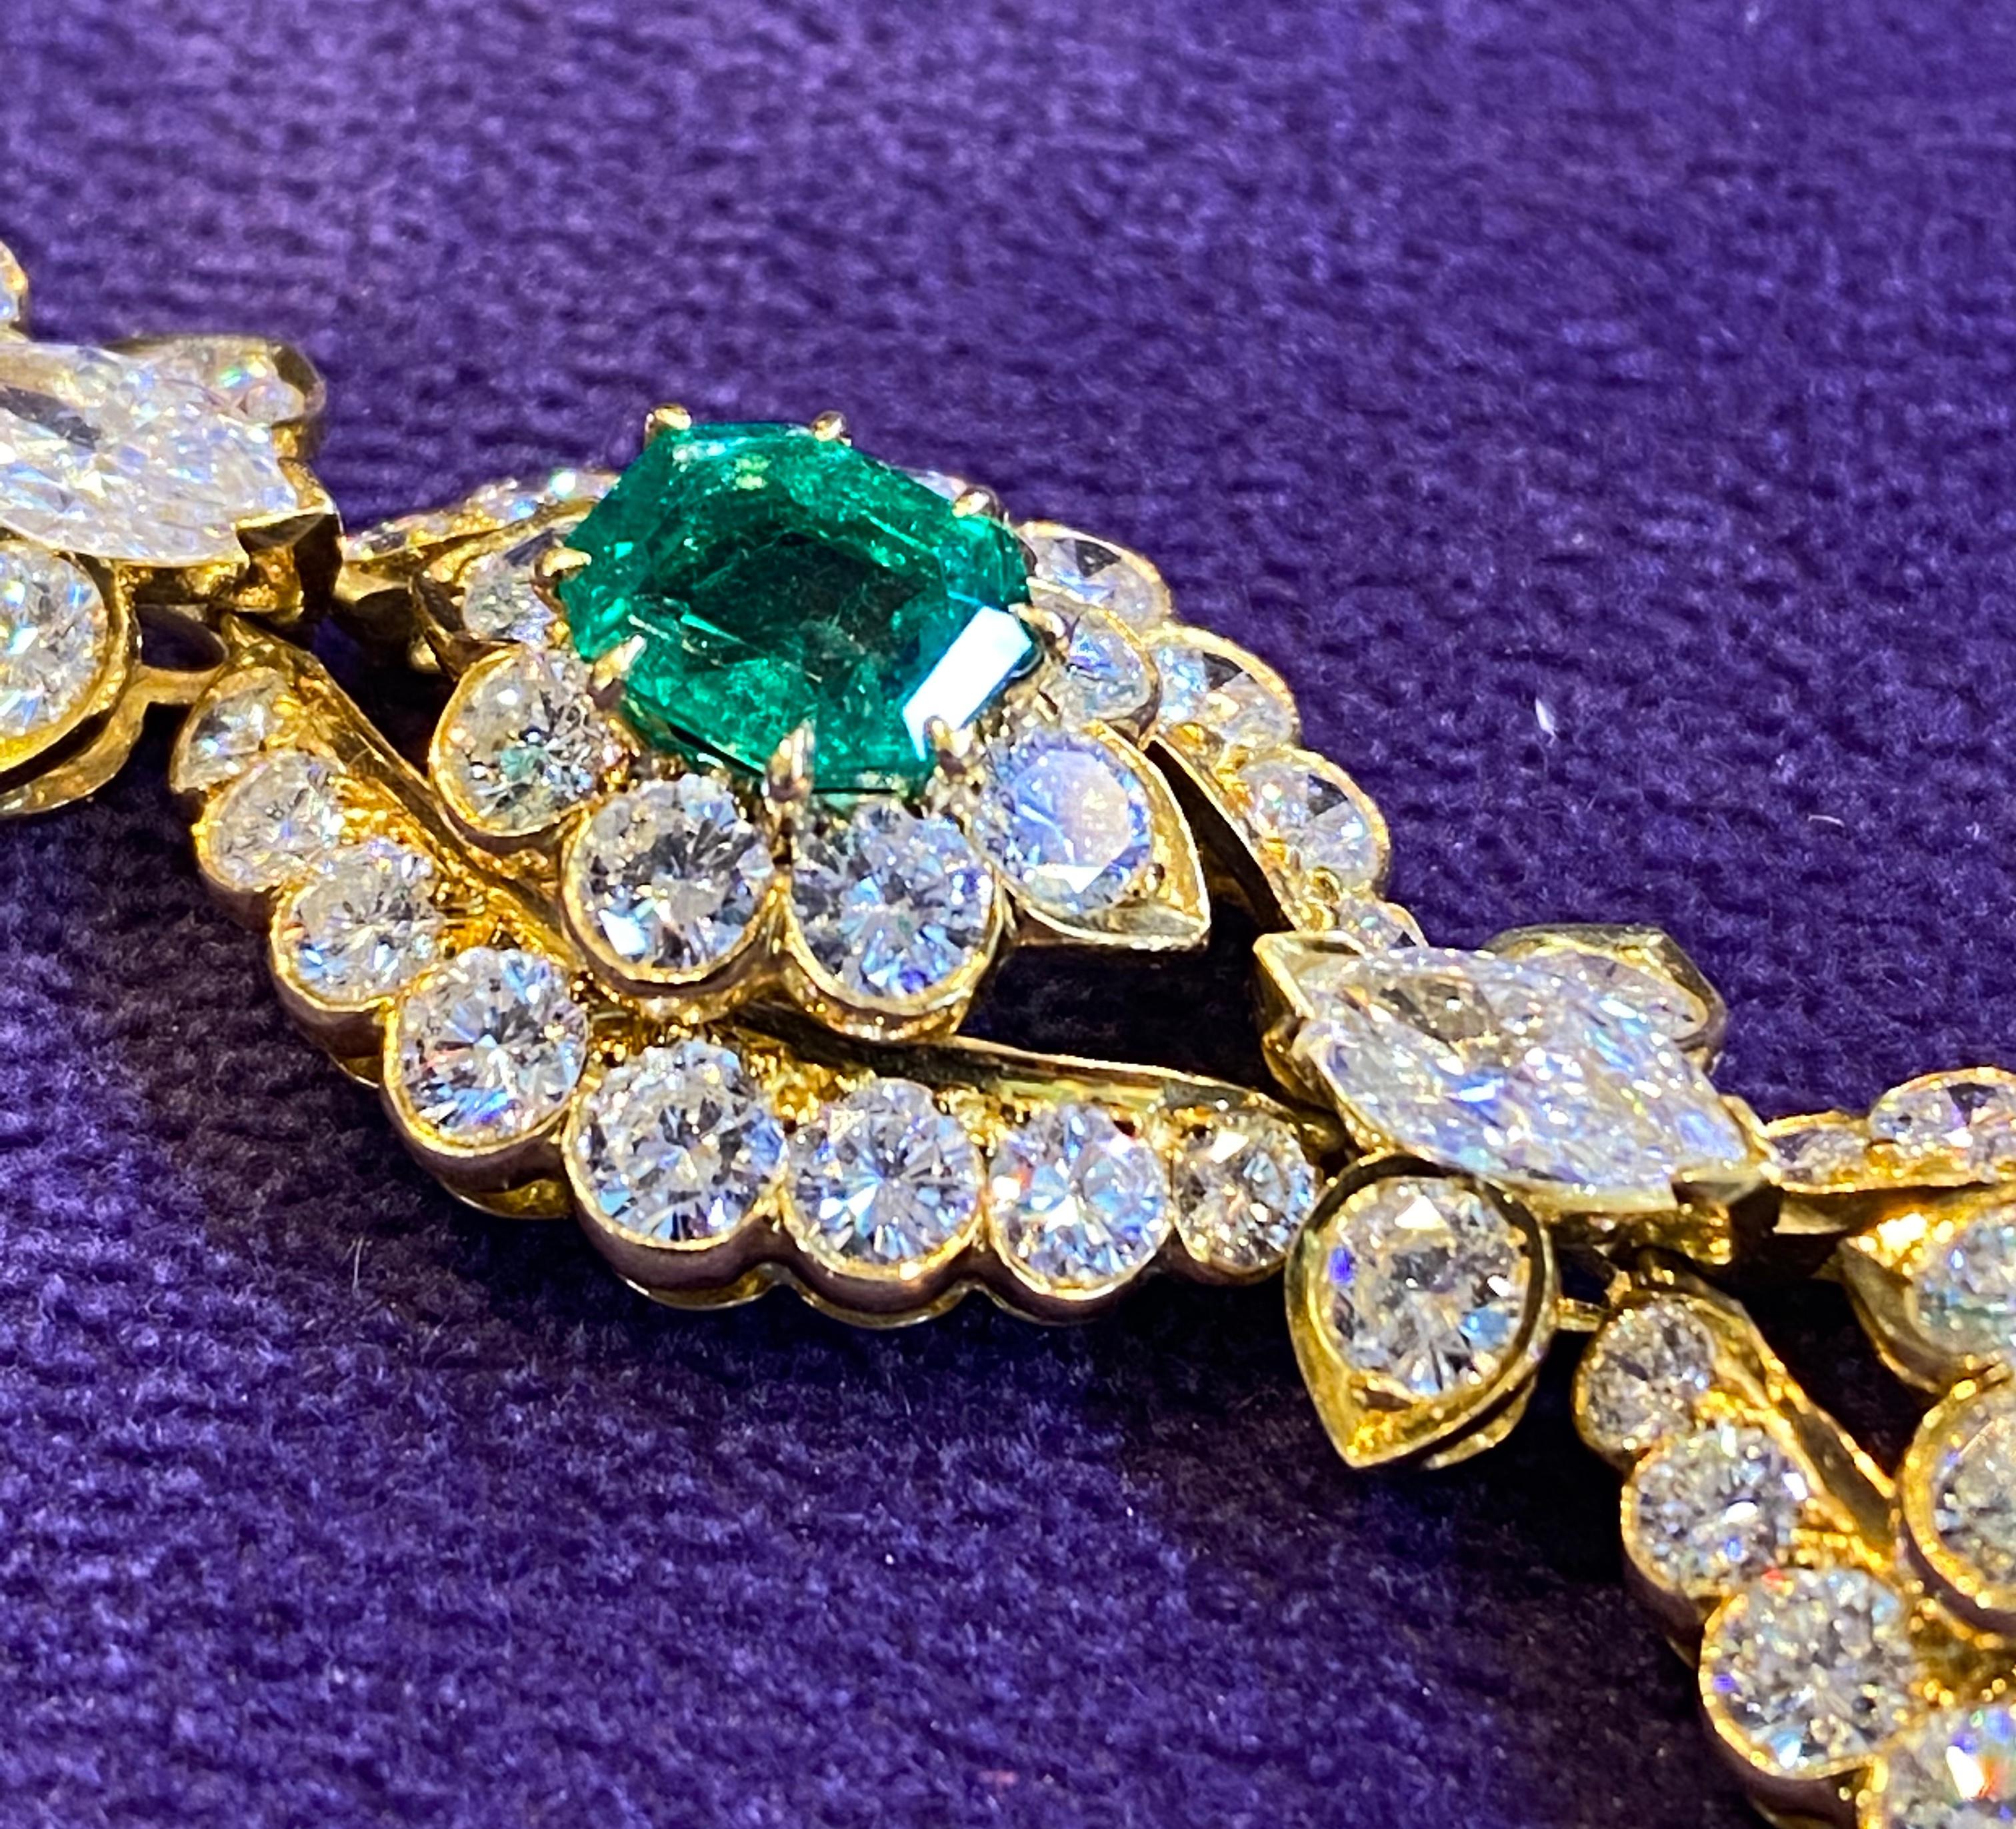 Van Cleef & Arpels Emerald & Diamond Bracelet In Excellent Condition For Sale In New York, NY